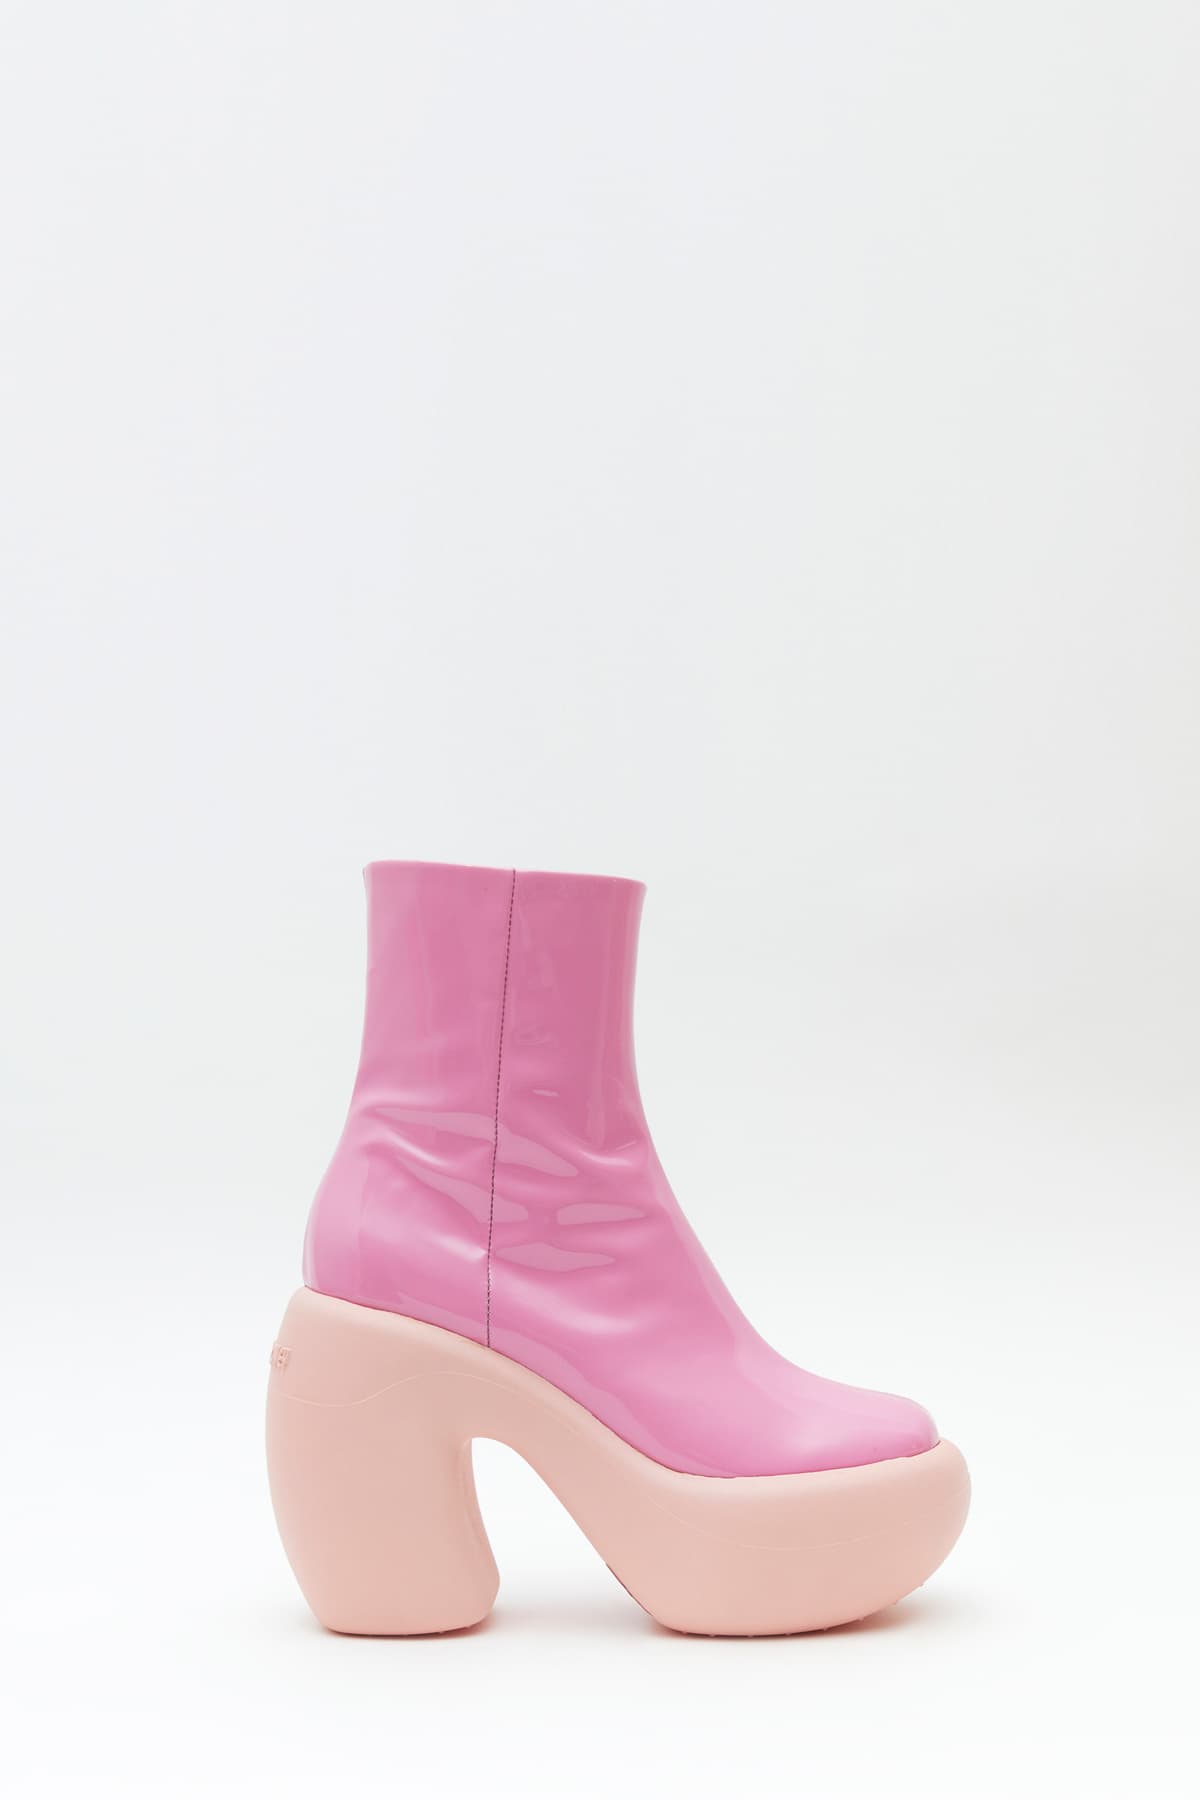 Sideview of Honey Bubble ankle boot in pink from the Haus of Honey fall-winter 2023-24